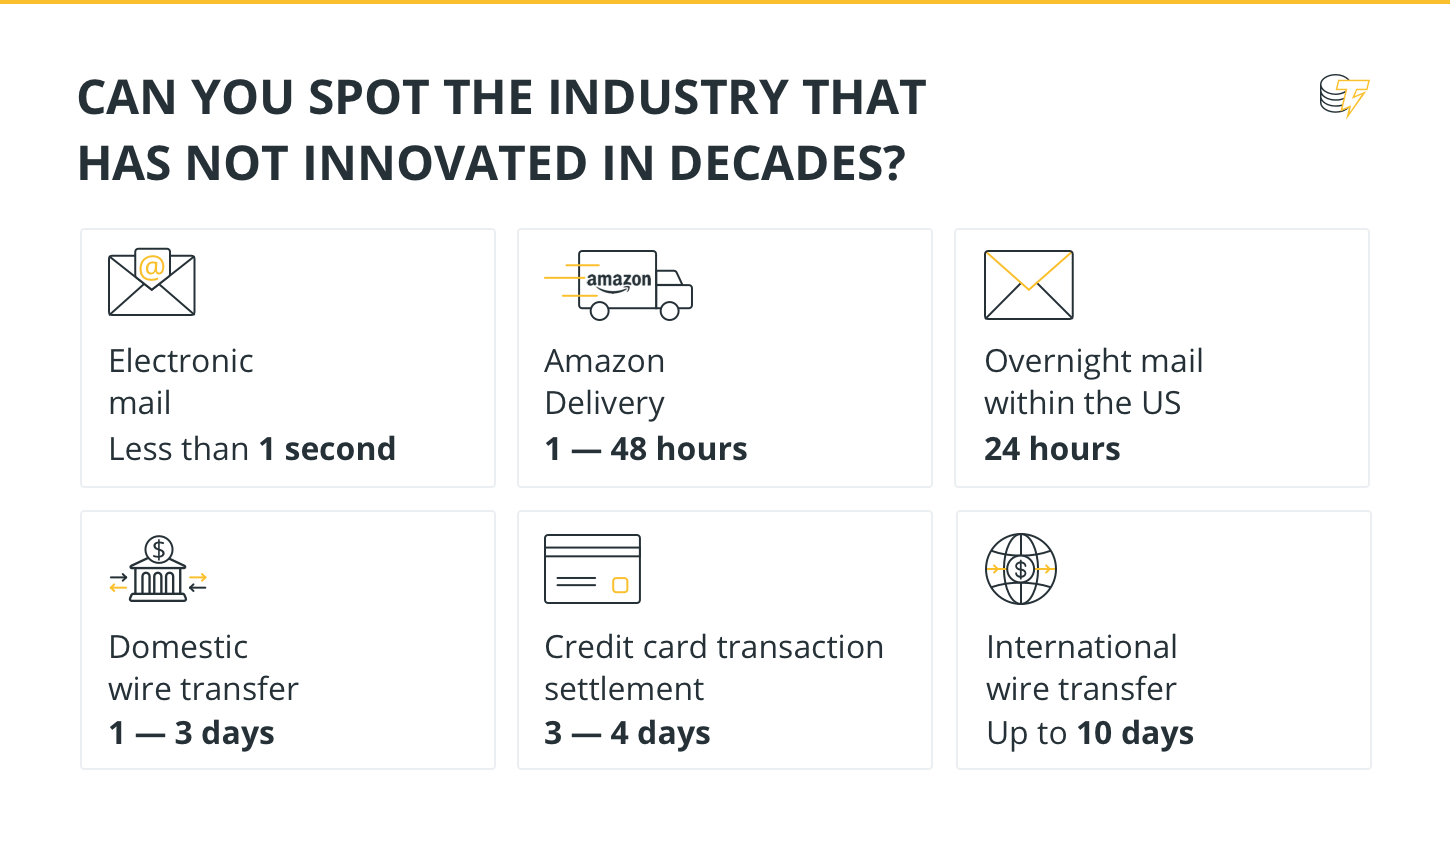 Can you spot the industry that has not innovated in decades?